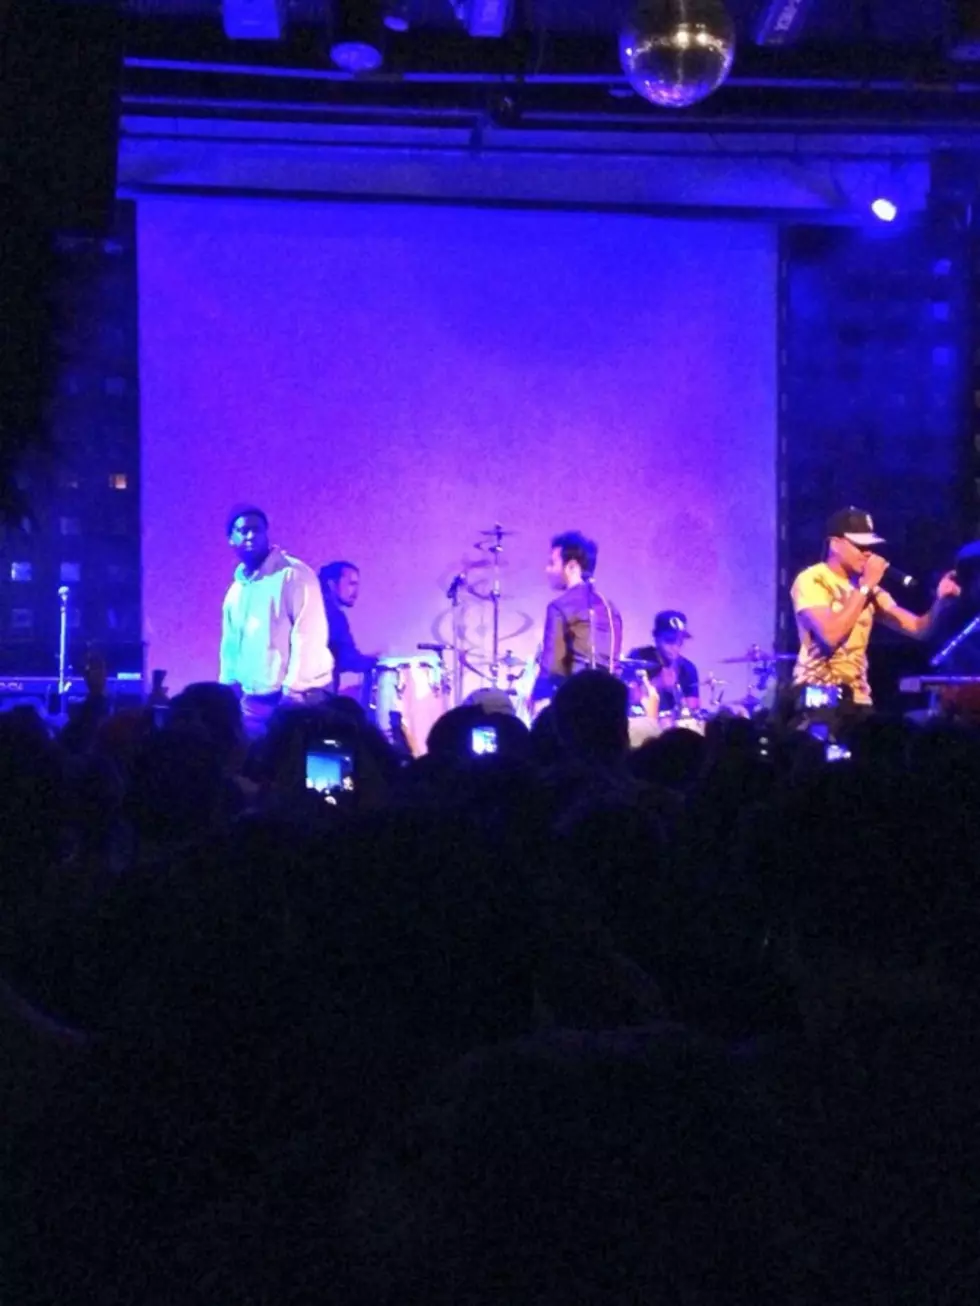 Chance the Rapper and the Social Experiment Get Jazzy at Their NYC Show